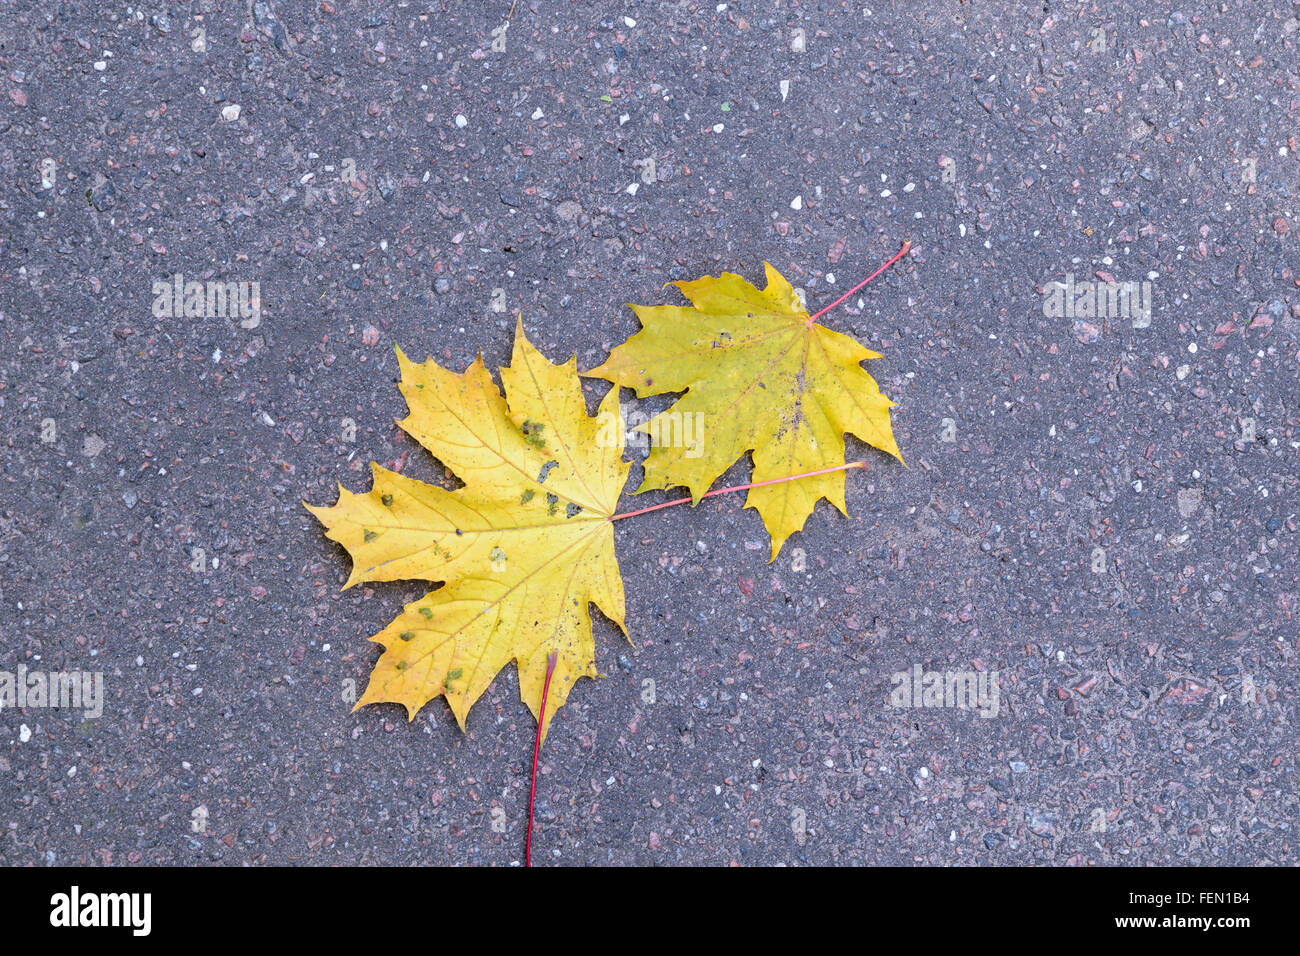 Two yellow autumn maple leaves lie on the asphalt pavement. Stock Photo